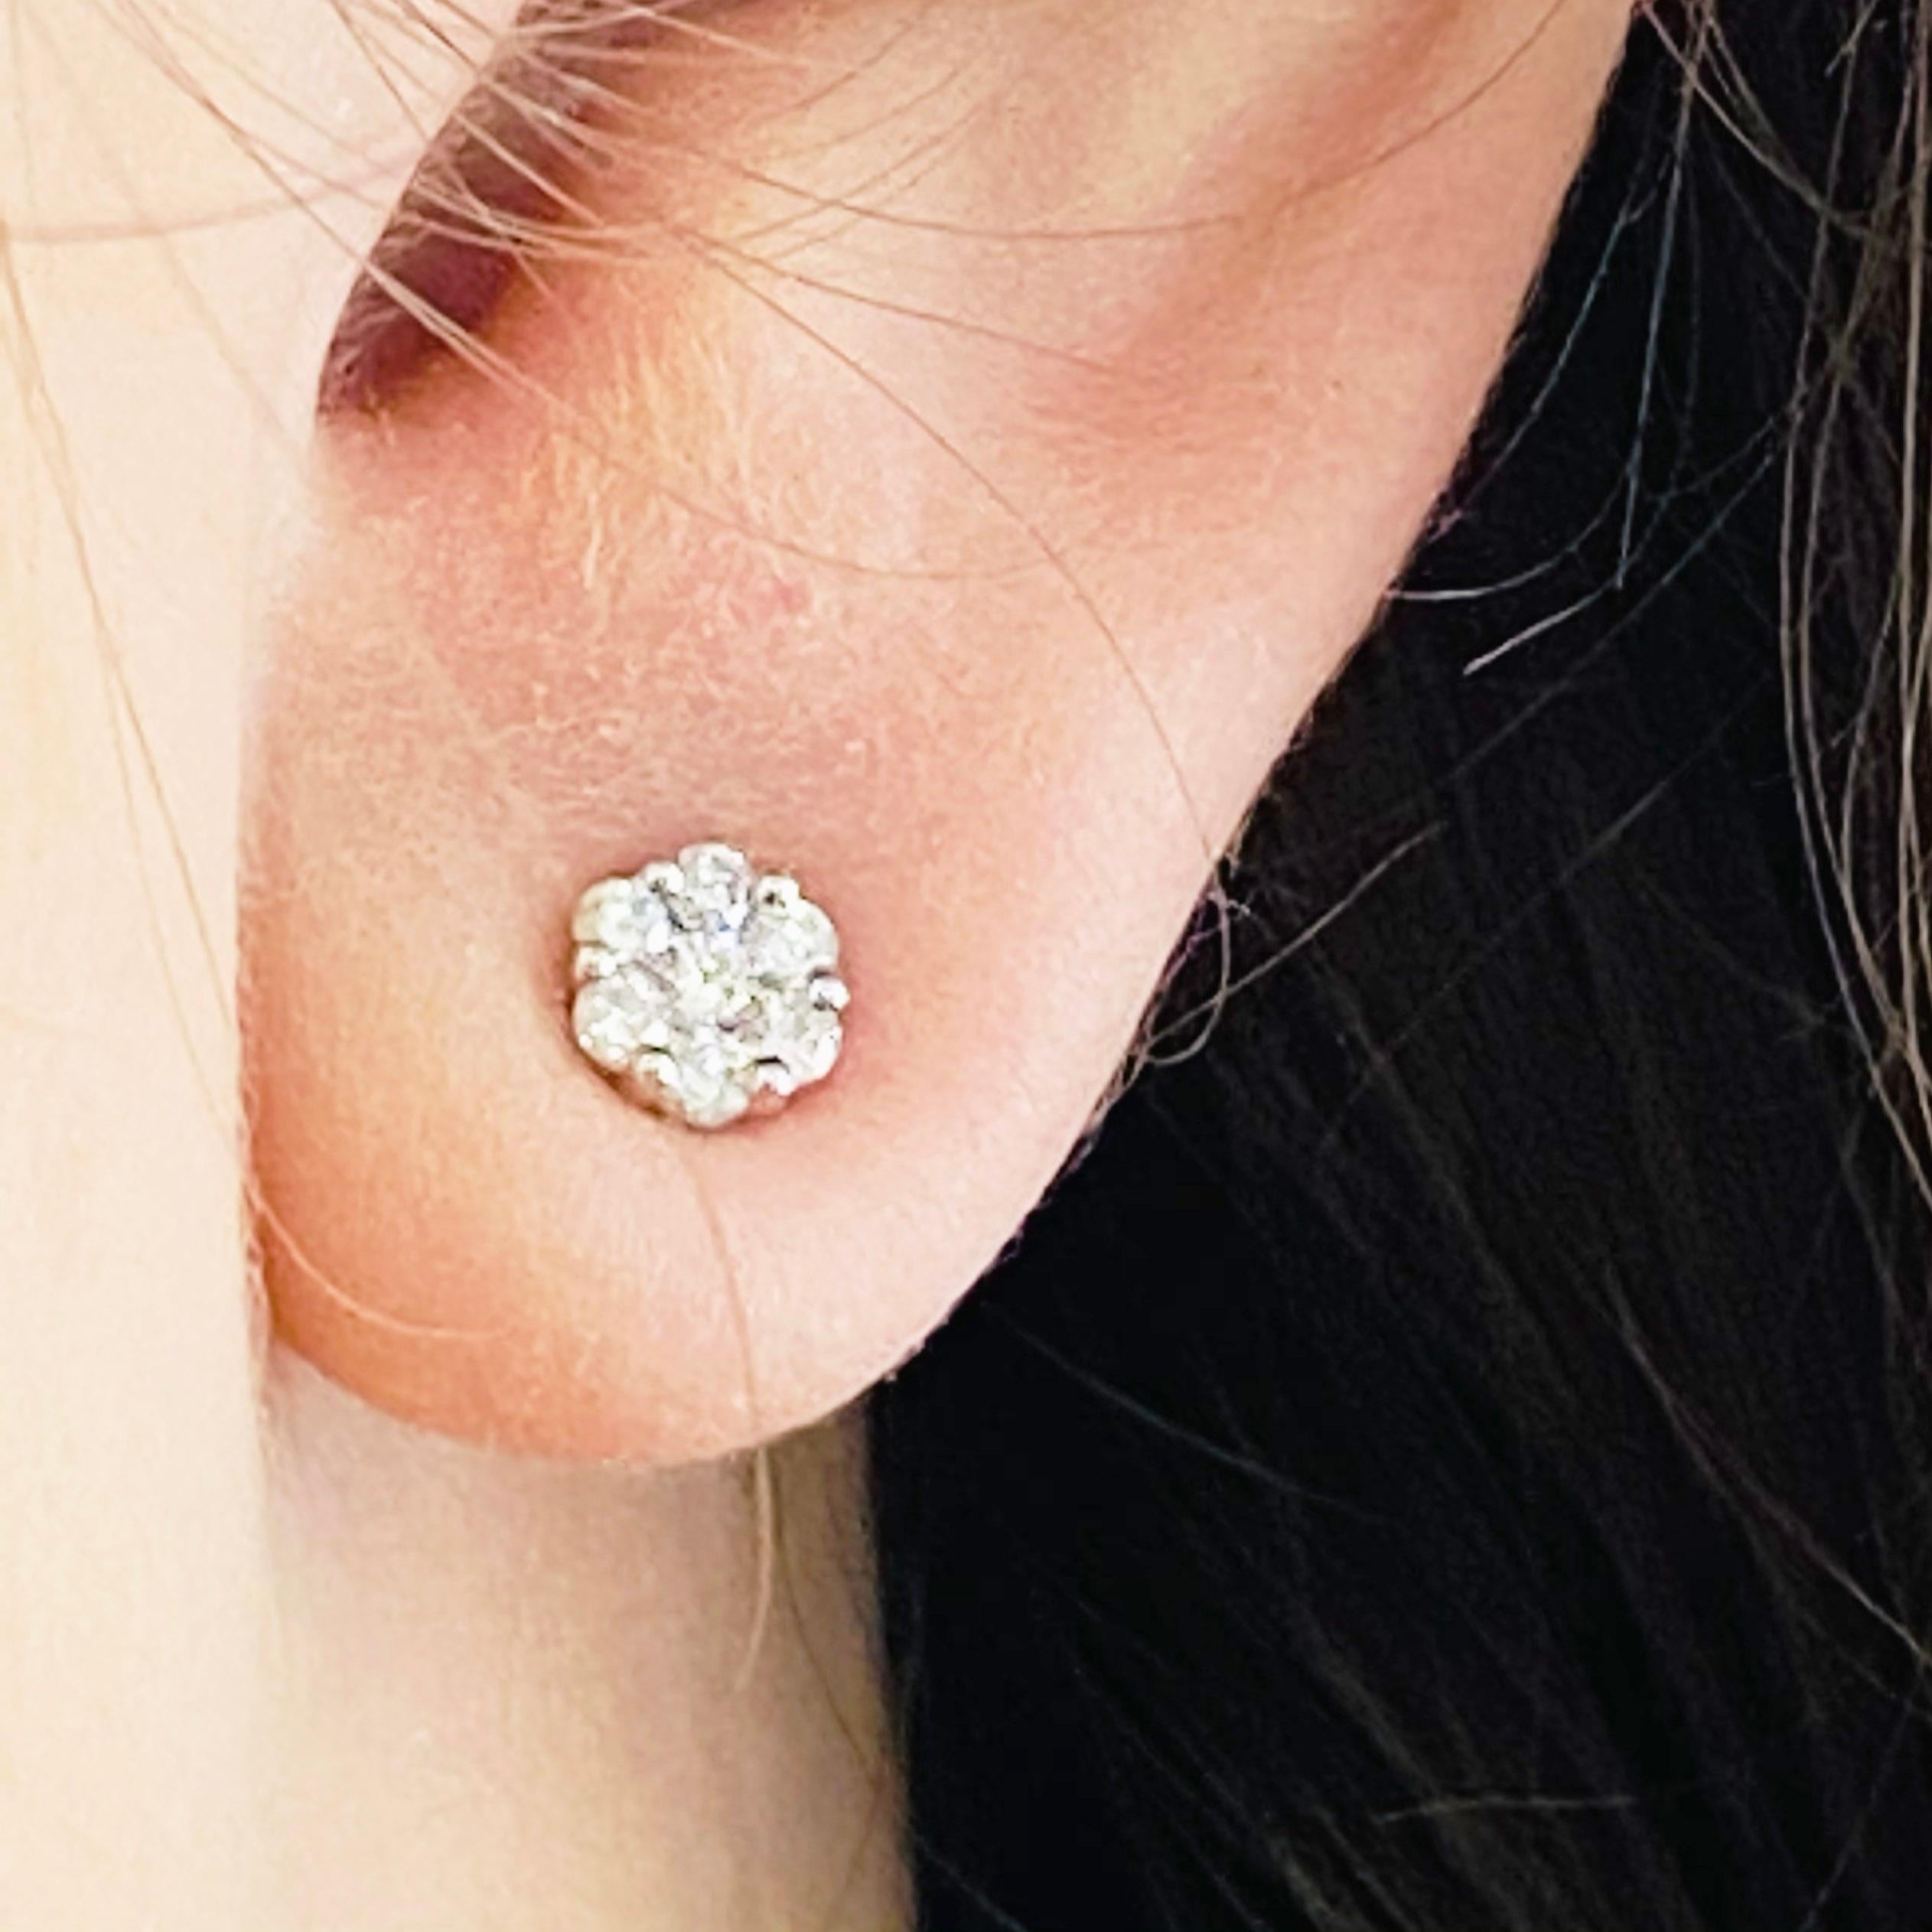 These stunning 14k white gold stud earrings dripping with diamonds provide a look that is both trendy and classic. These diamond earrings are a great staple to add to your collection, and can be worn with both casual and formal wear.  These earrings